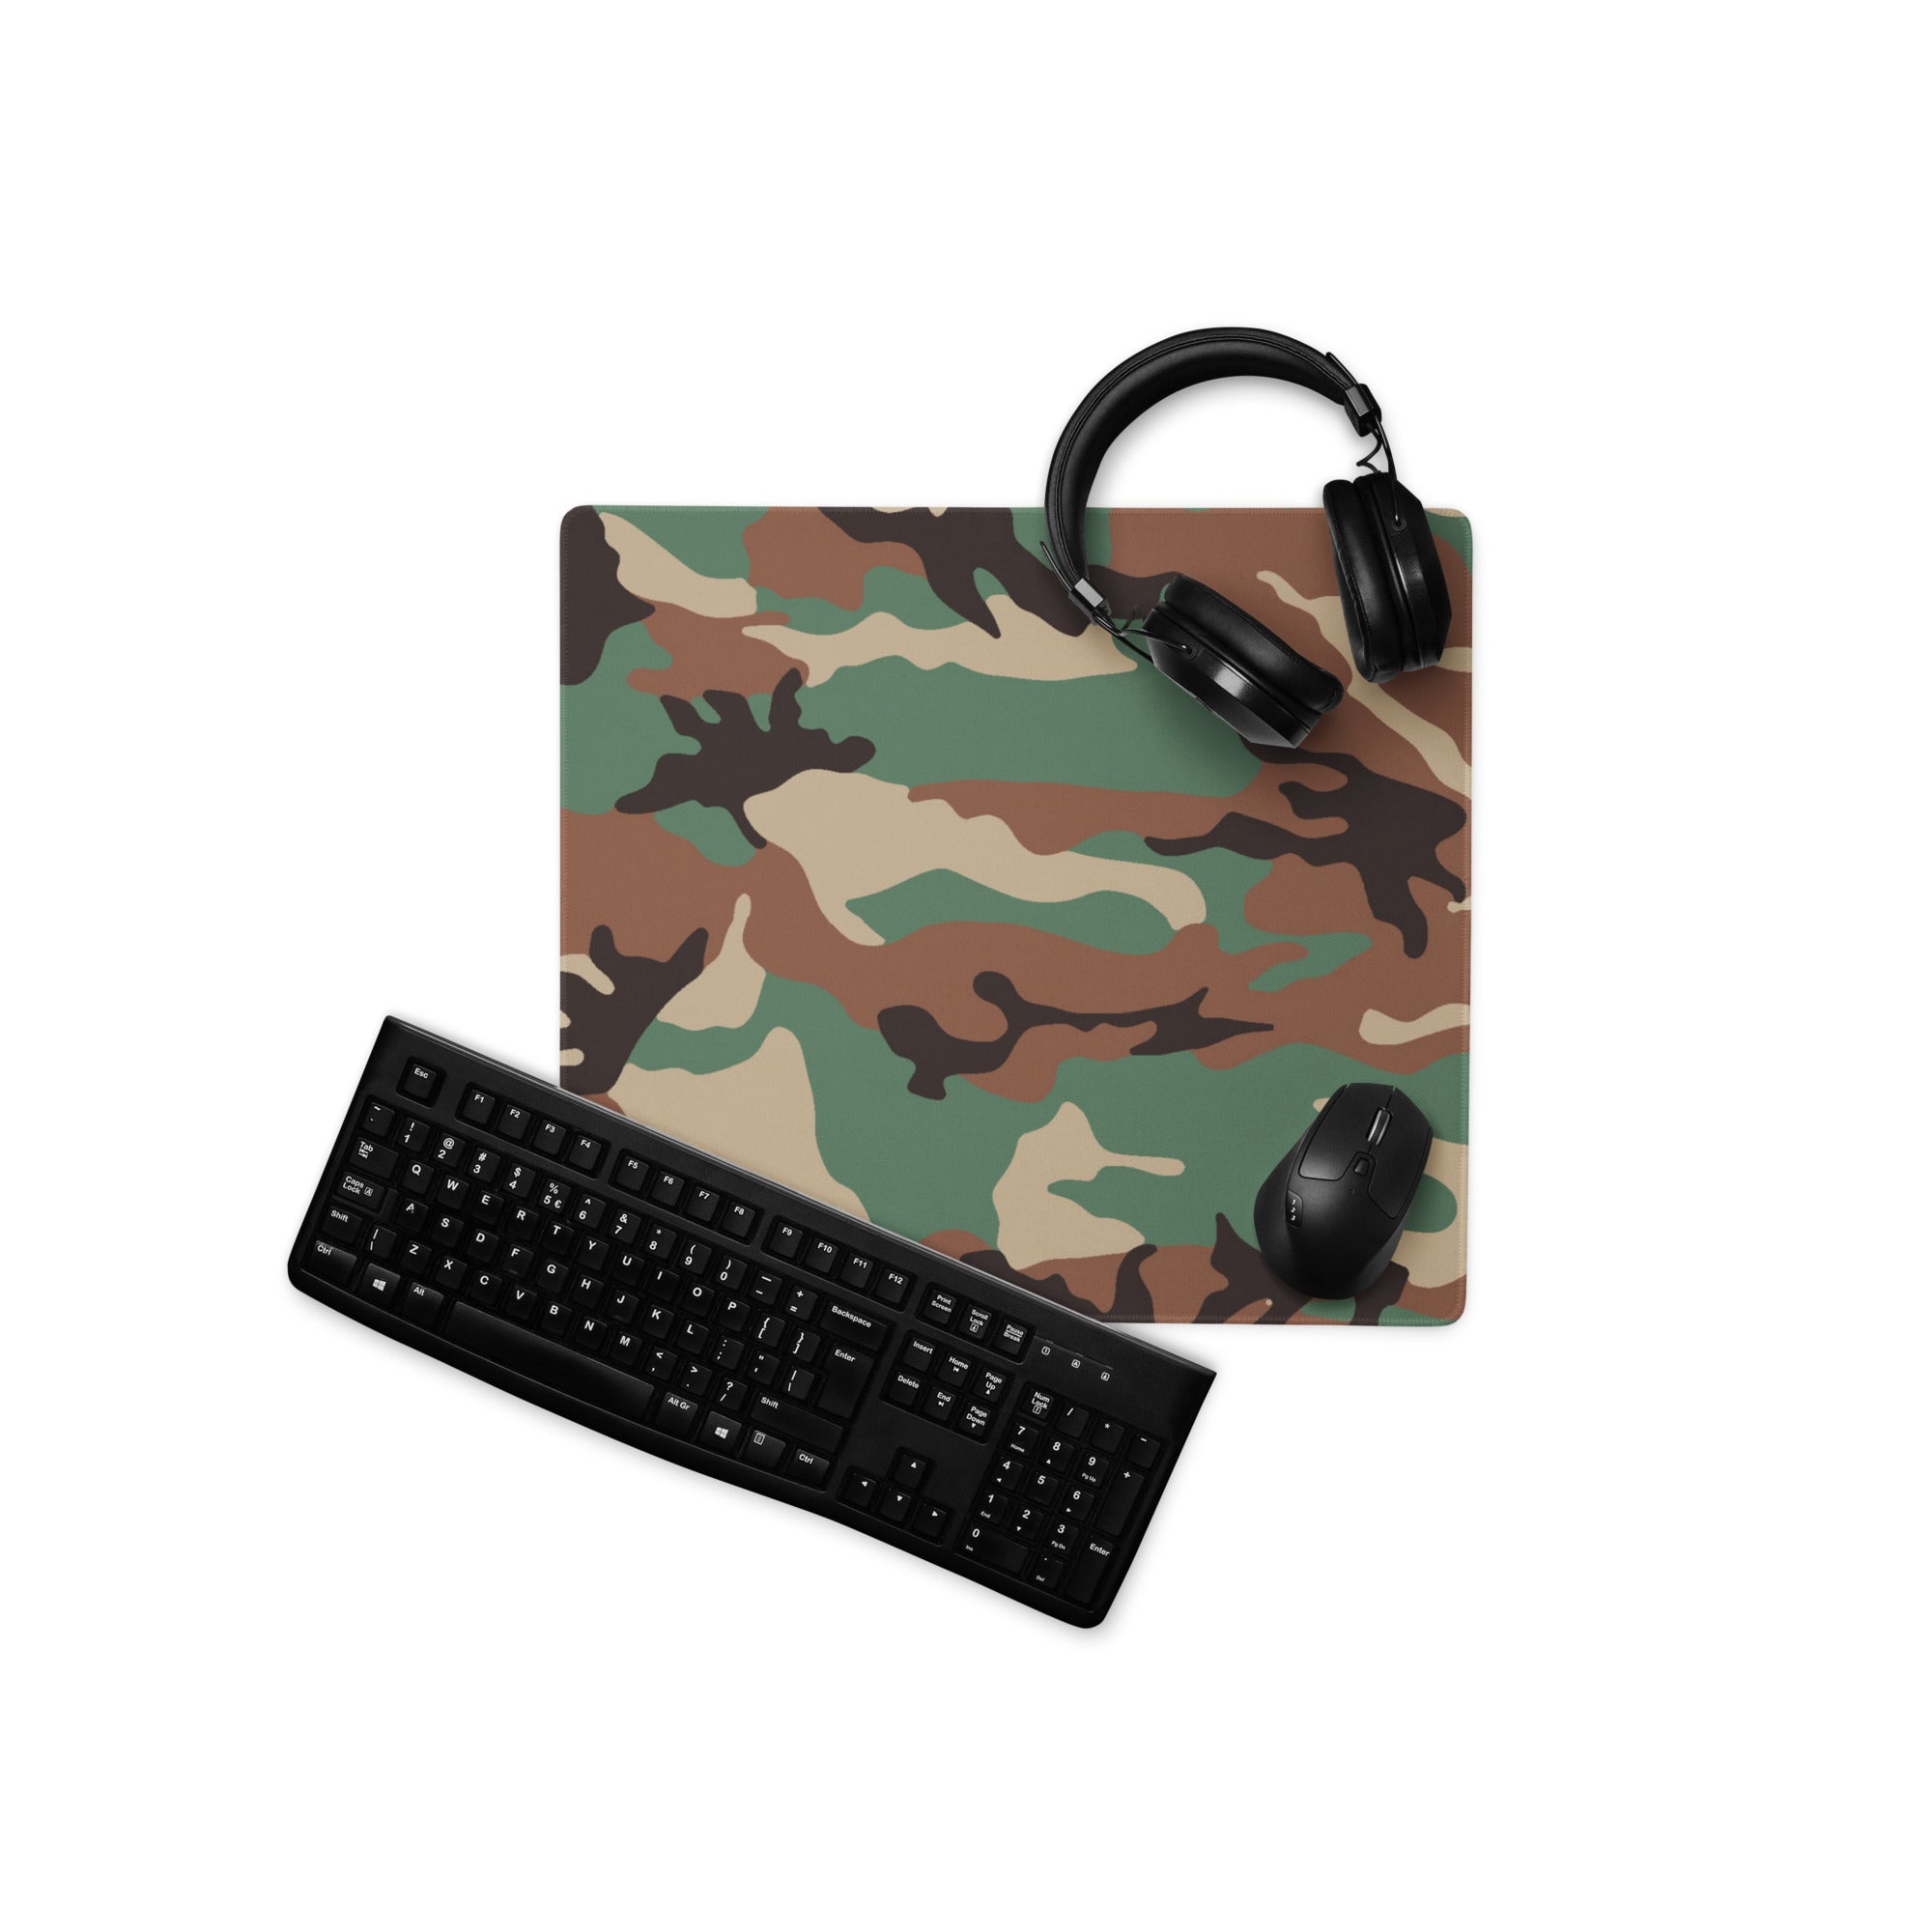 Syrian Woodland CAMO Gaming mouse pad - 18″×16″